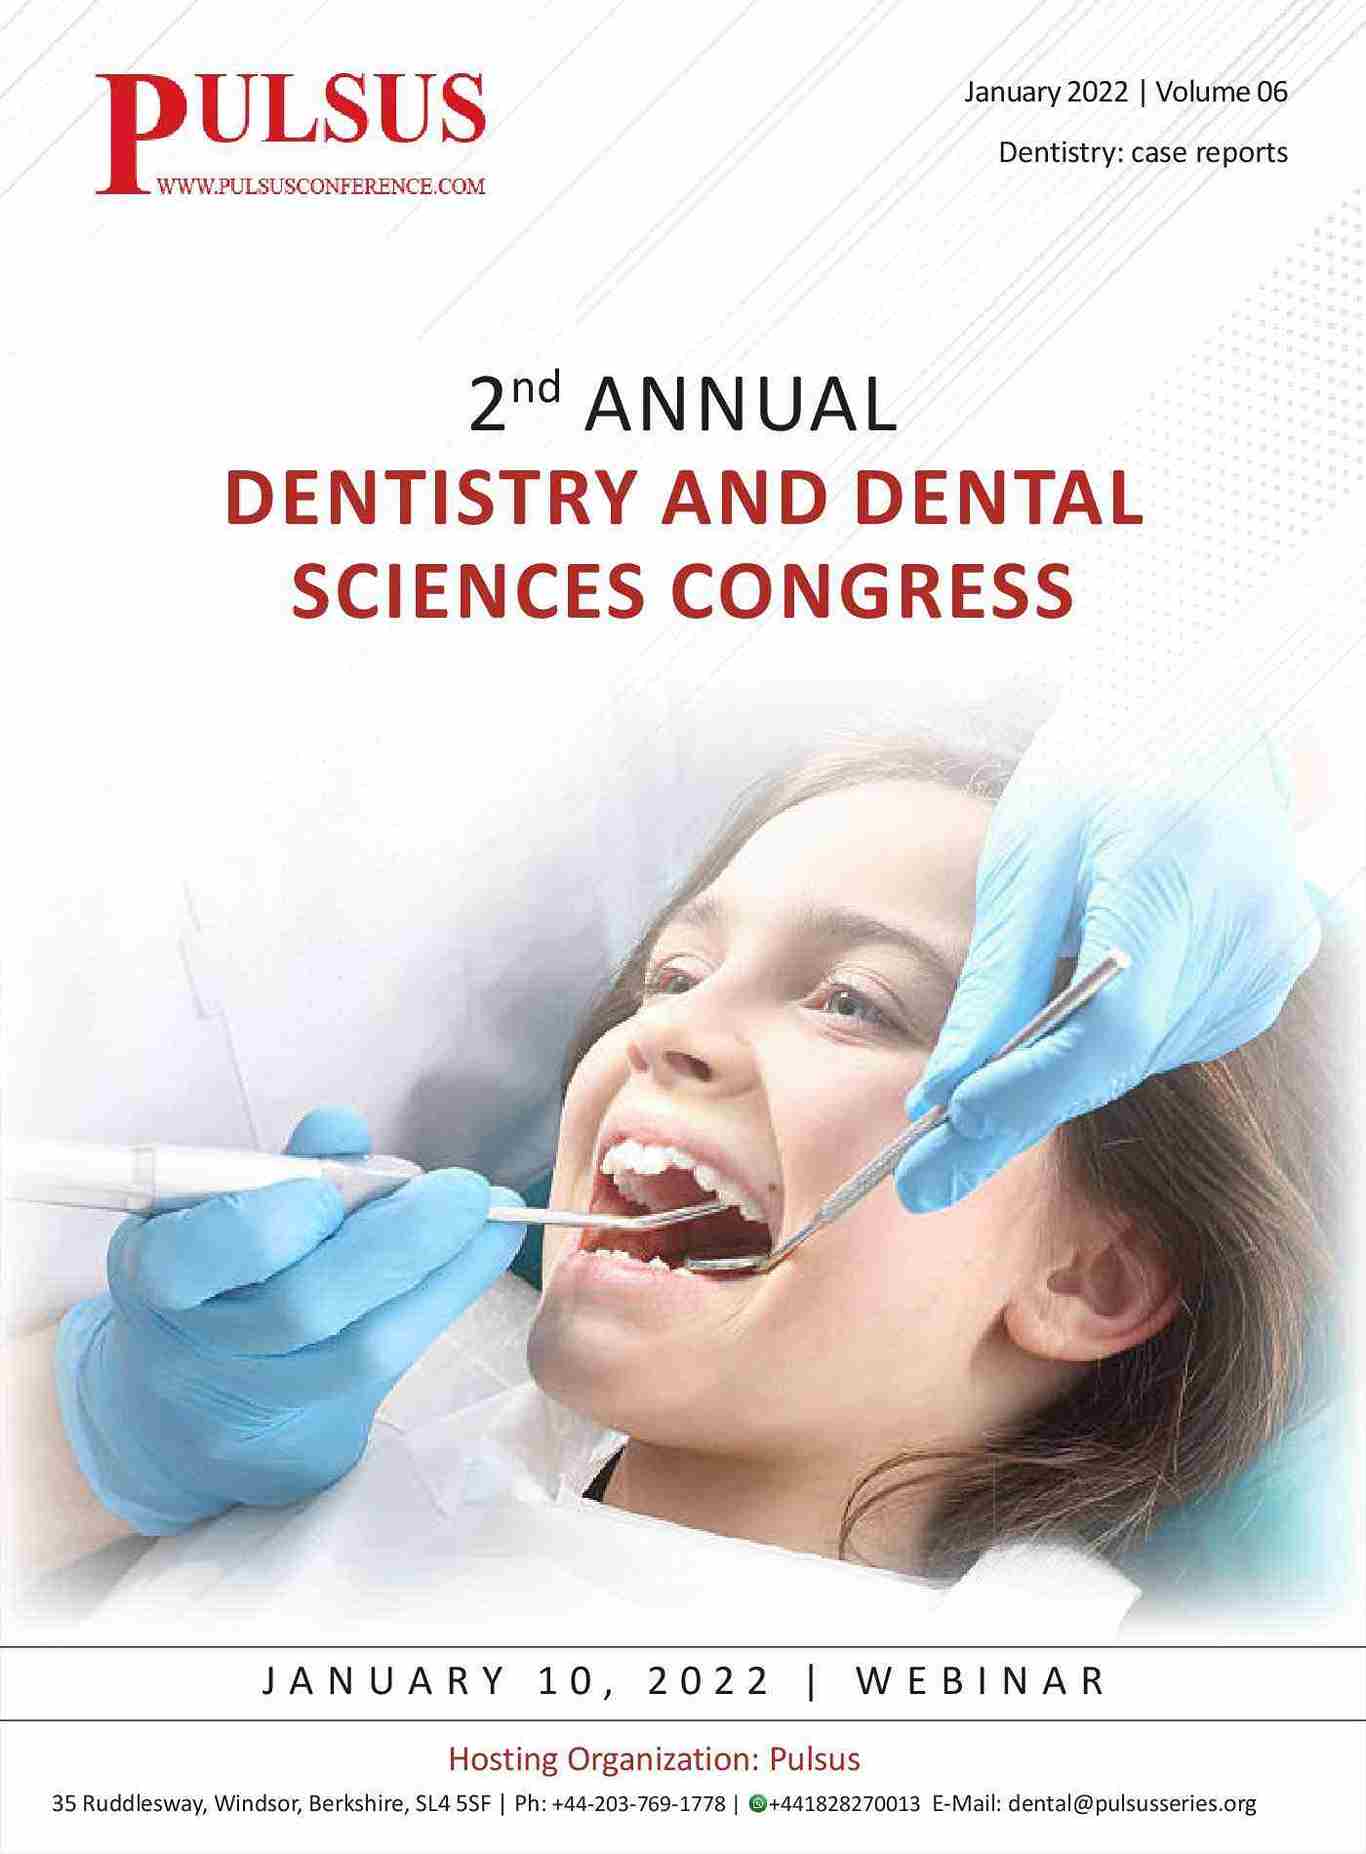 https://www.pulsus.com/conference-abstracts/dental-science-2022-proceedings.html